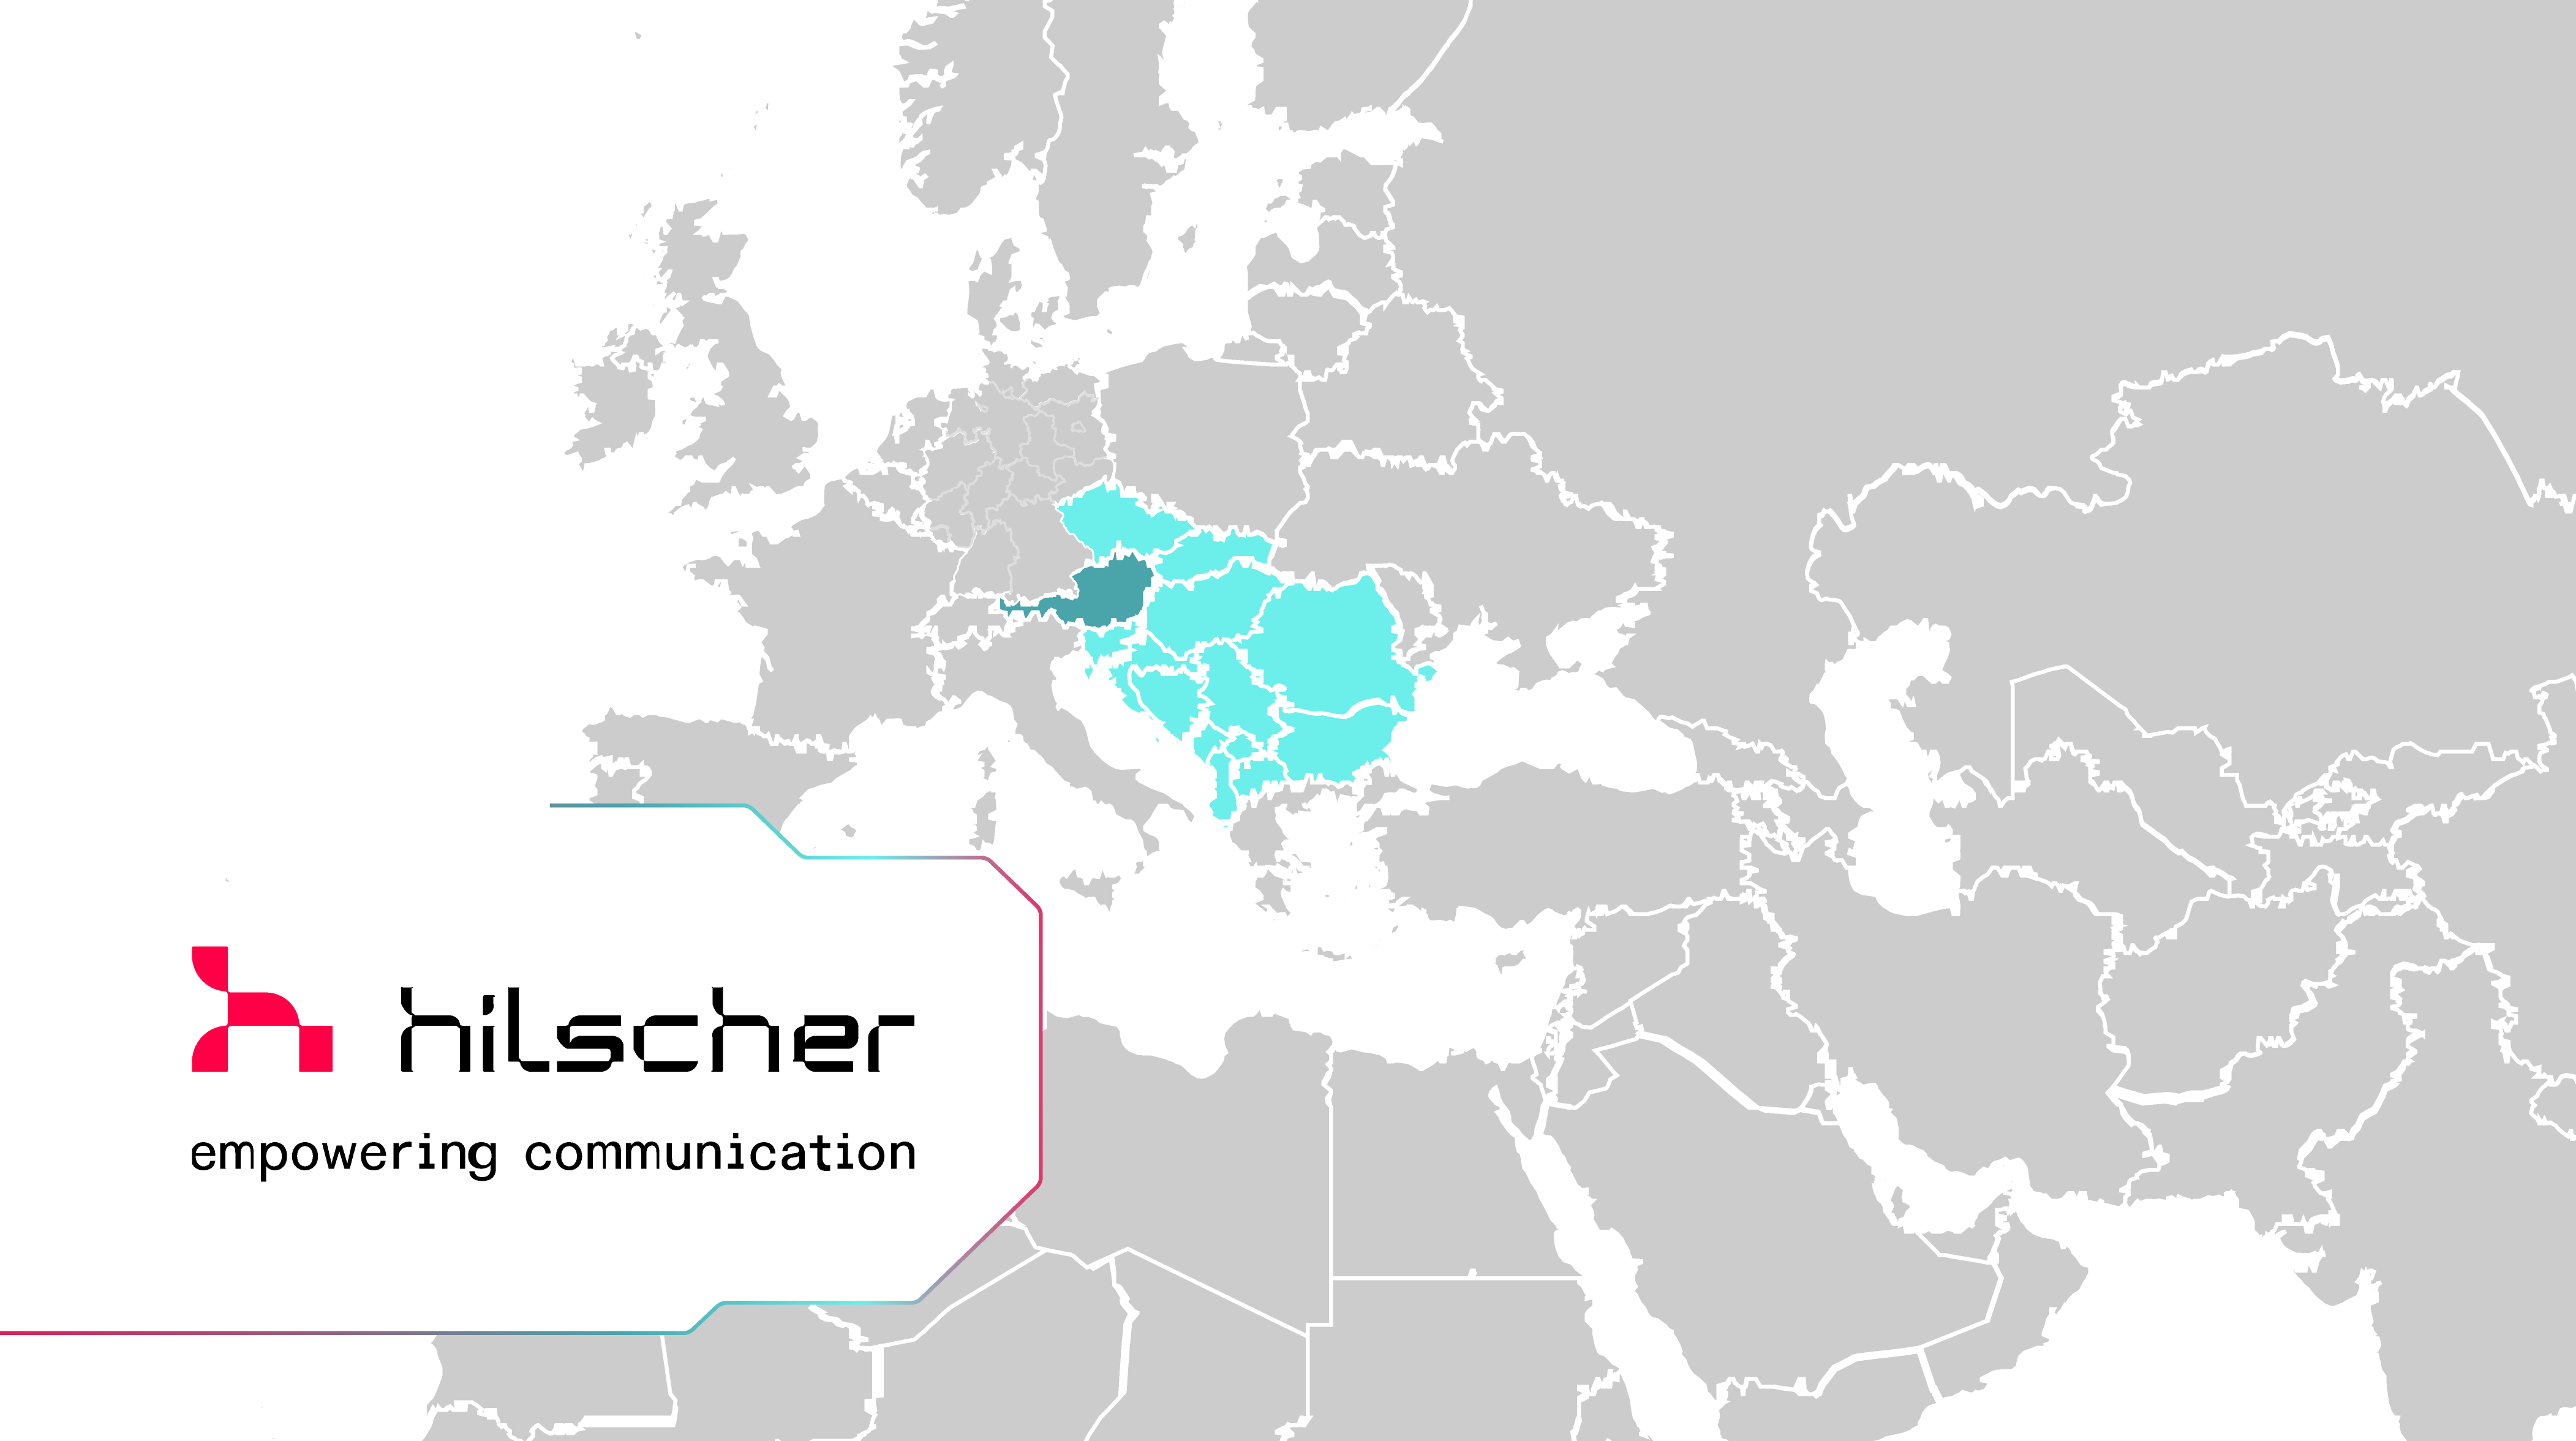 A map of Europe with the majority of countries colored in grey. Austria as well as the central and eastern European markets are colored in turquoise. On the left side is a Hilscher logo framed with a colorful line around it.